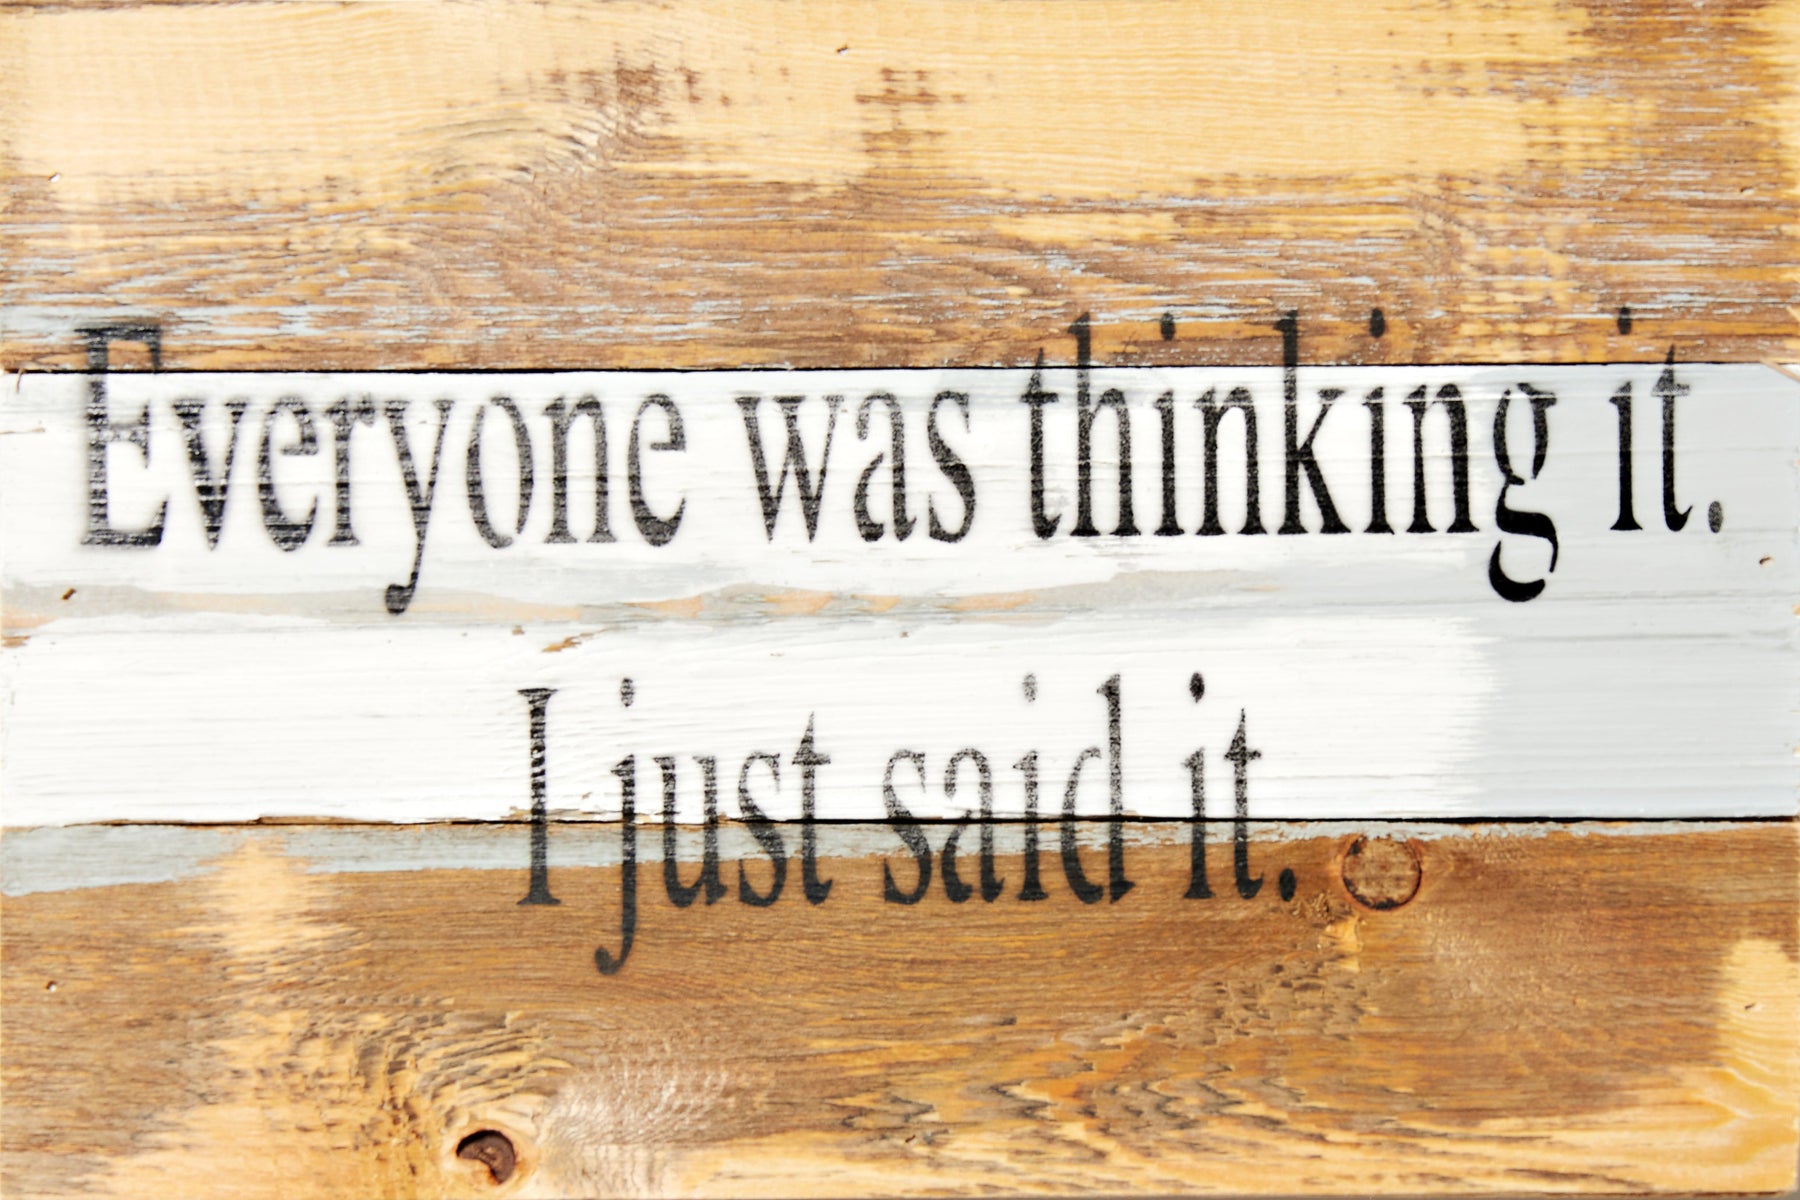 Everyone was thinking it. I just said it. / 12x8 Reclaimed Wood Wall Art